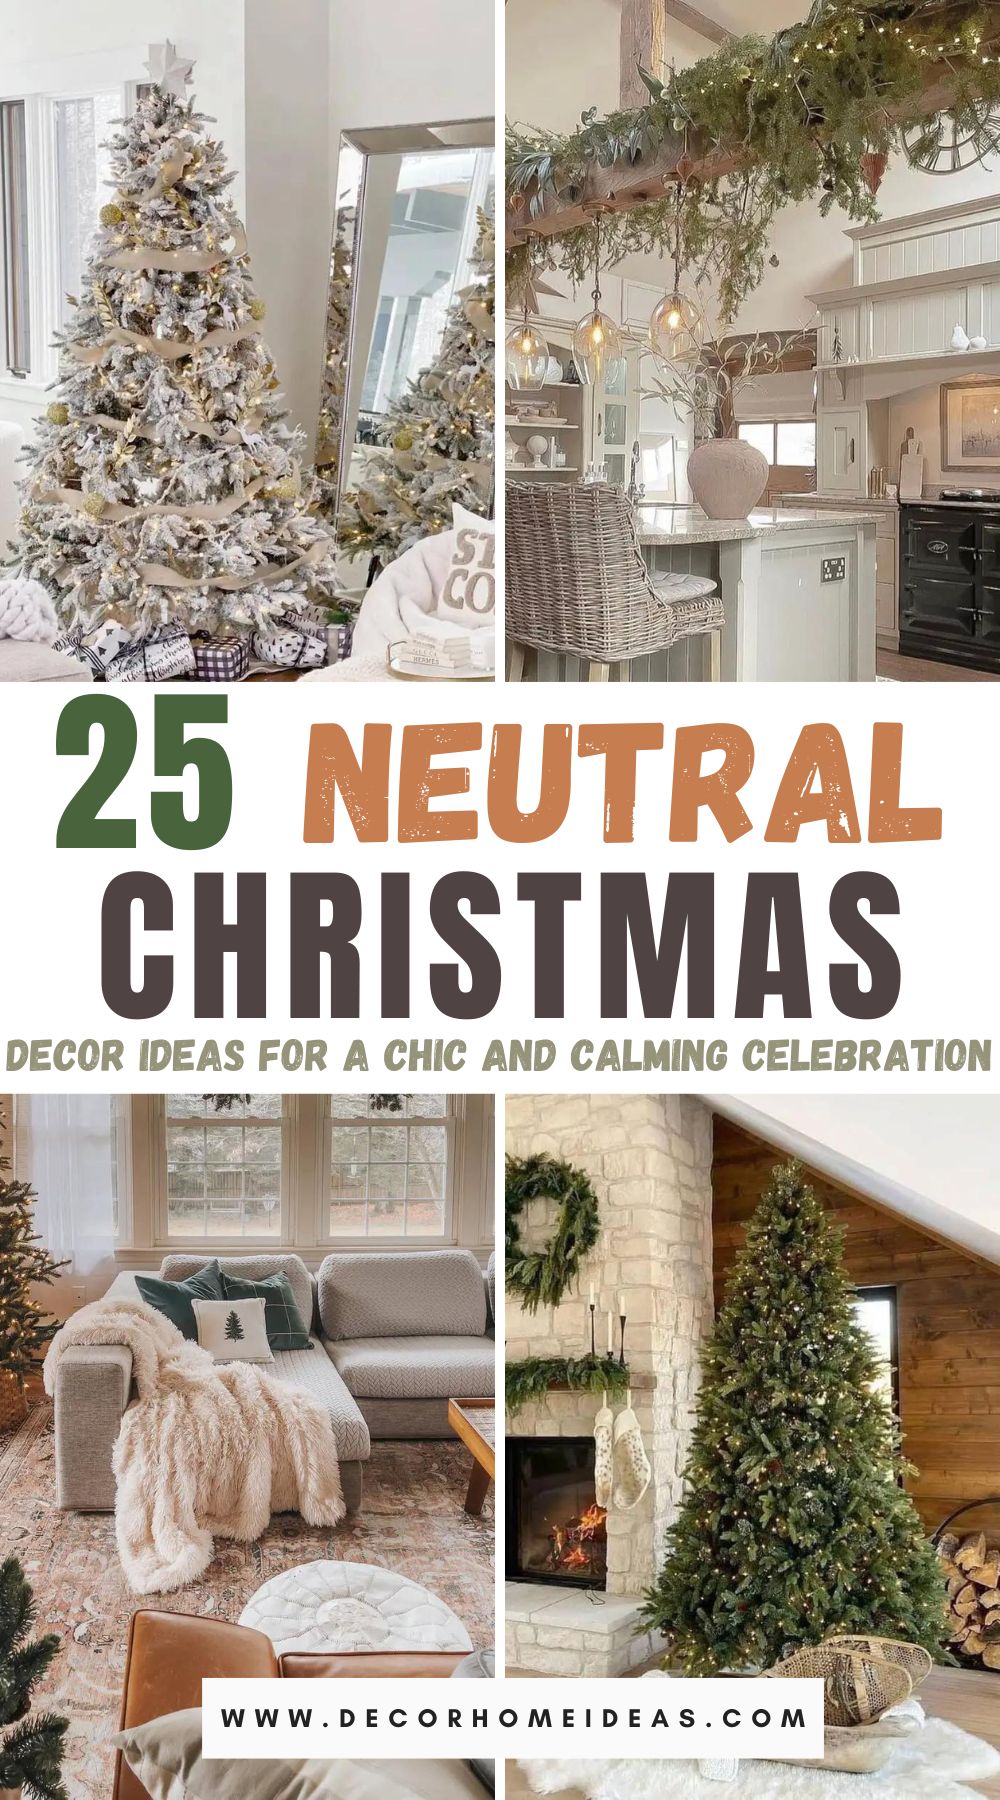 Looking for inspiration in neutral holiday decor? Wondering how to infuse tranquility into your festive space? Explore 25 elegant ideas and transform your home with timeless charm.